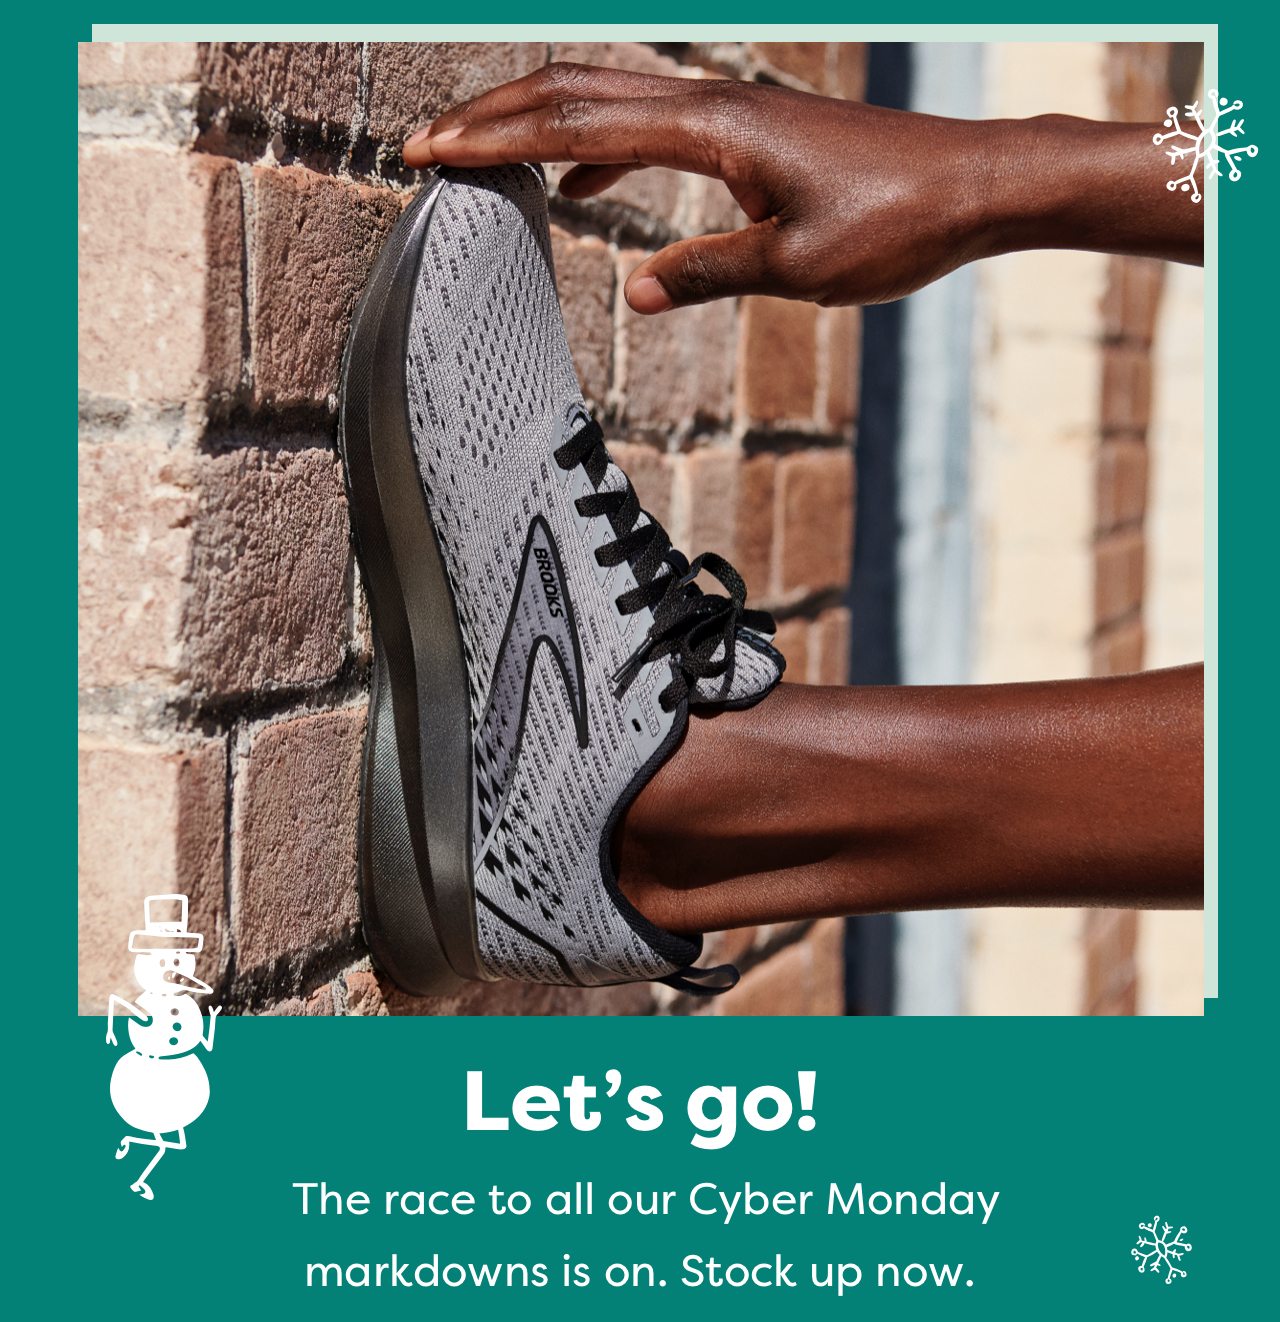 Let's go! The race to all our Cyber Monday markdowns is on. Stock up now.